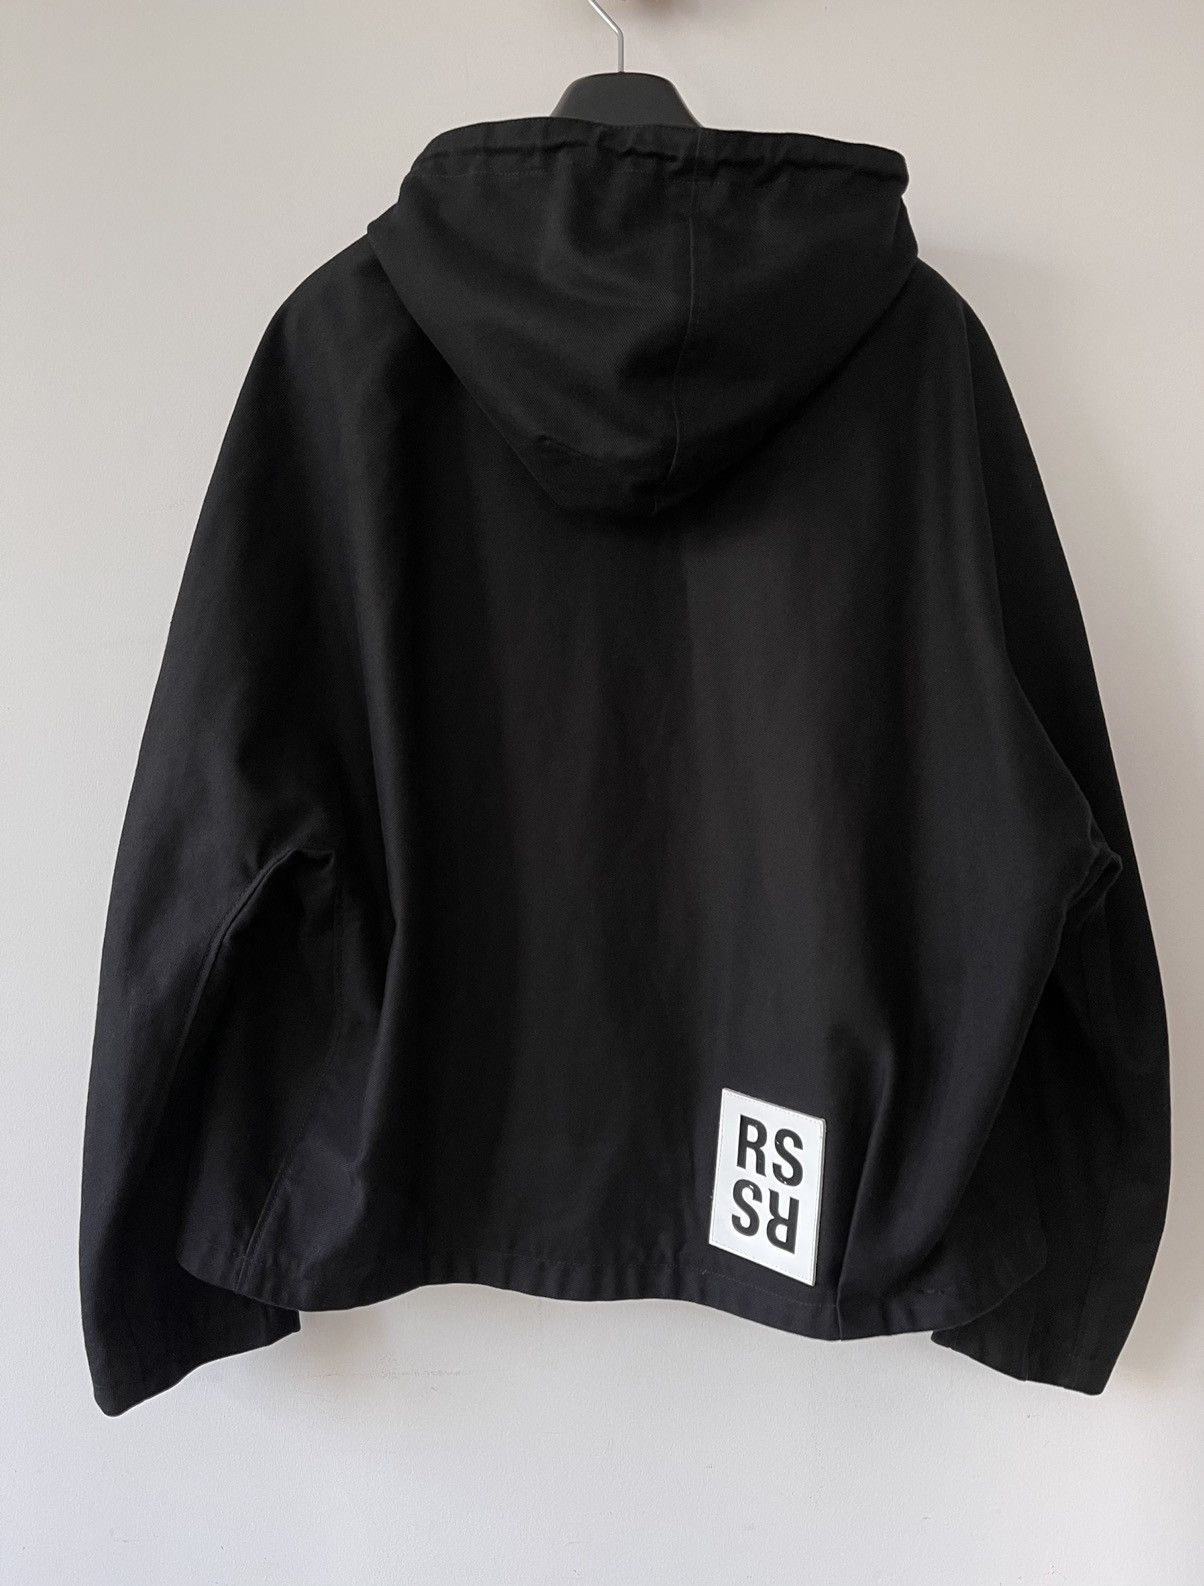 Raf Simons Black short hooded jacket with patch | Grailed